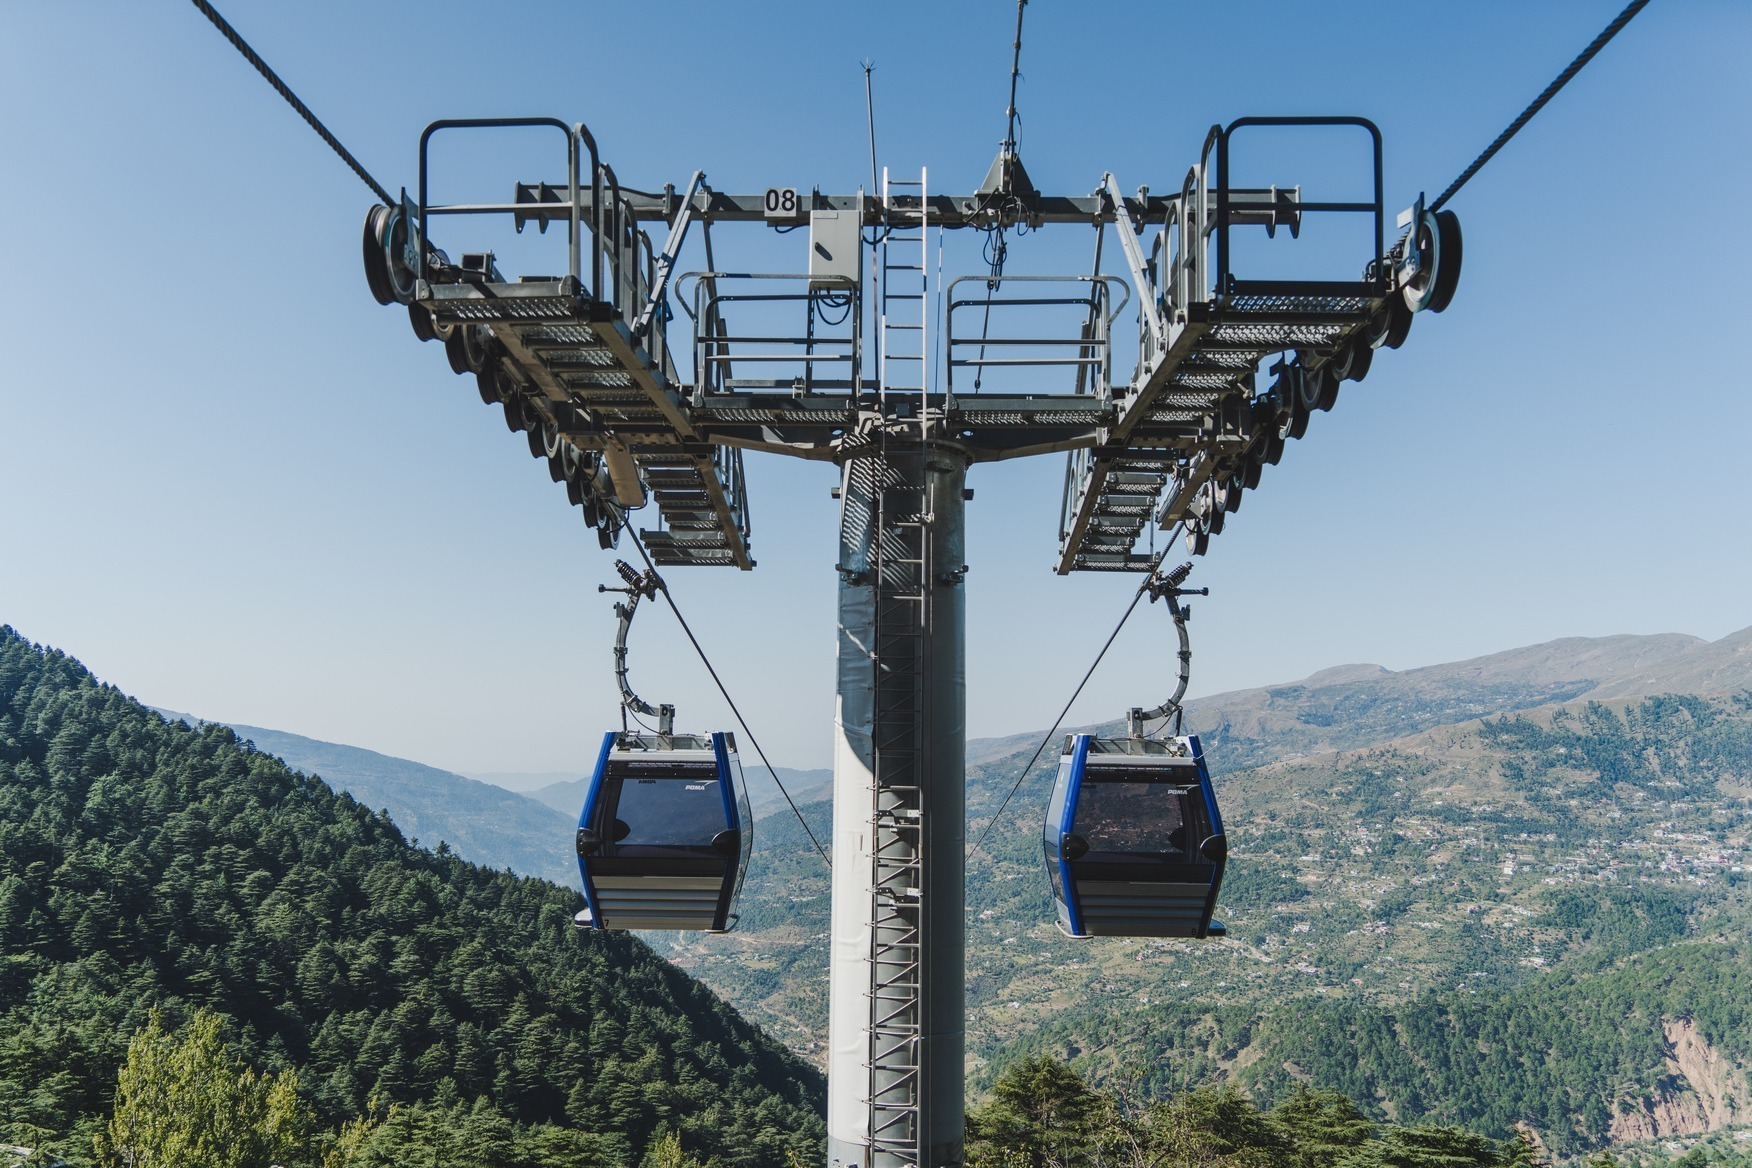 Construction begins of India’s longest ropeway connecting Dehradun and Mussoorie